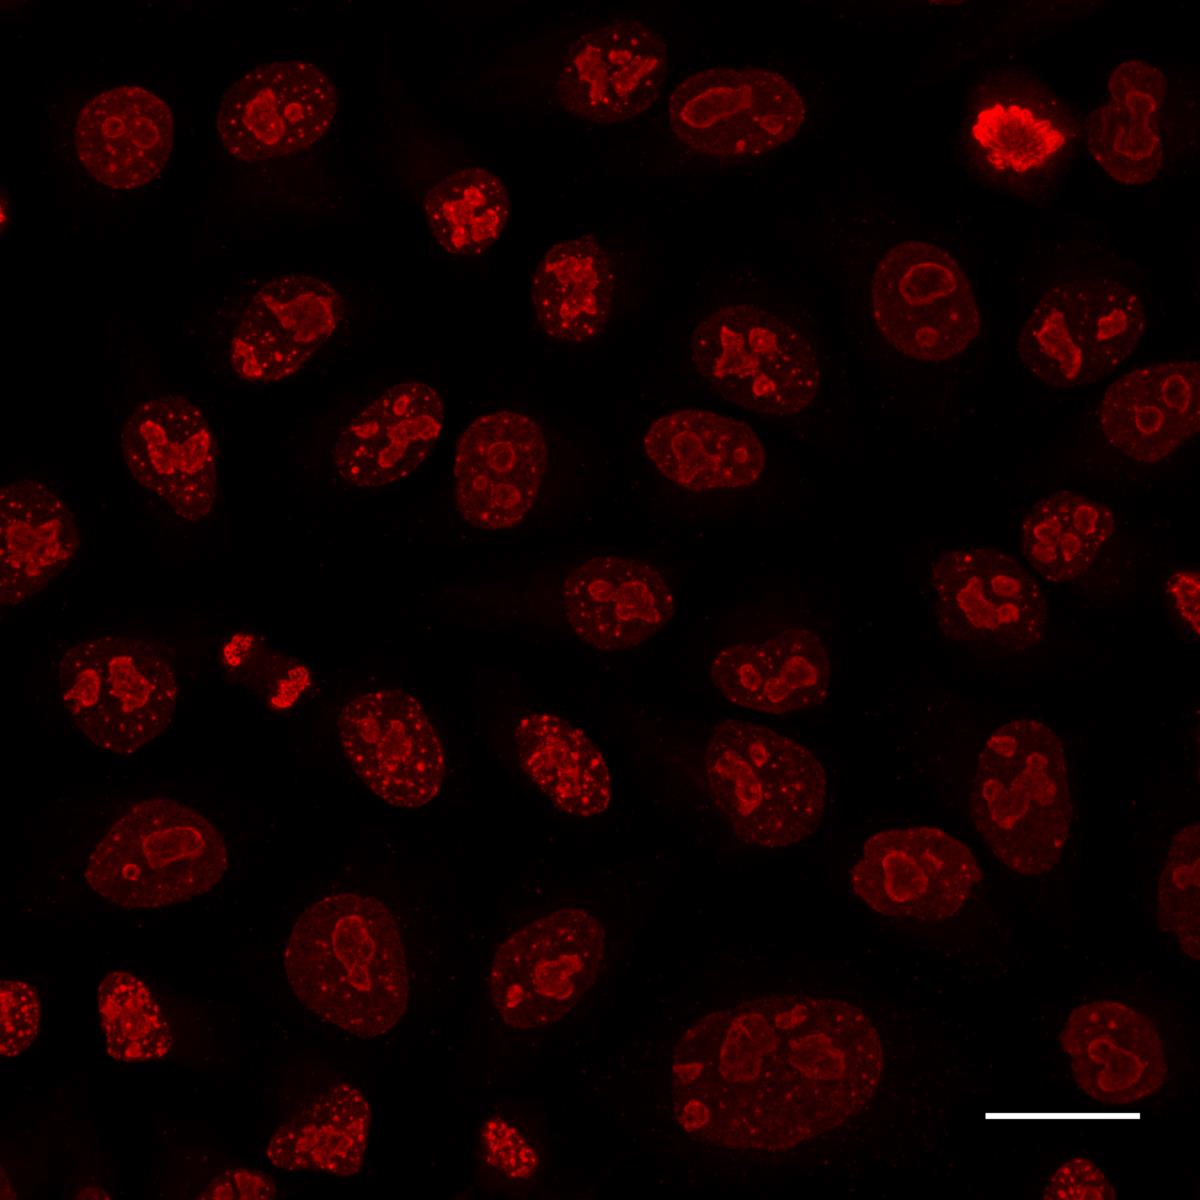 Alpaca anti-rabbit IgG VHH Alexa Fluor? 568 was applied together with rabbit anti-Ki67 antibodies for detection of Ki67 (red) in HeLa cells. Scale bar, 20 μm. Images were recorded at the Core Facility Bioimaging at the Biomedical Center, LMU Munich.